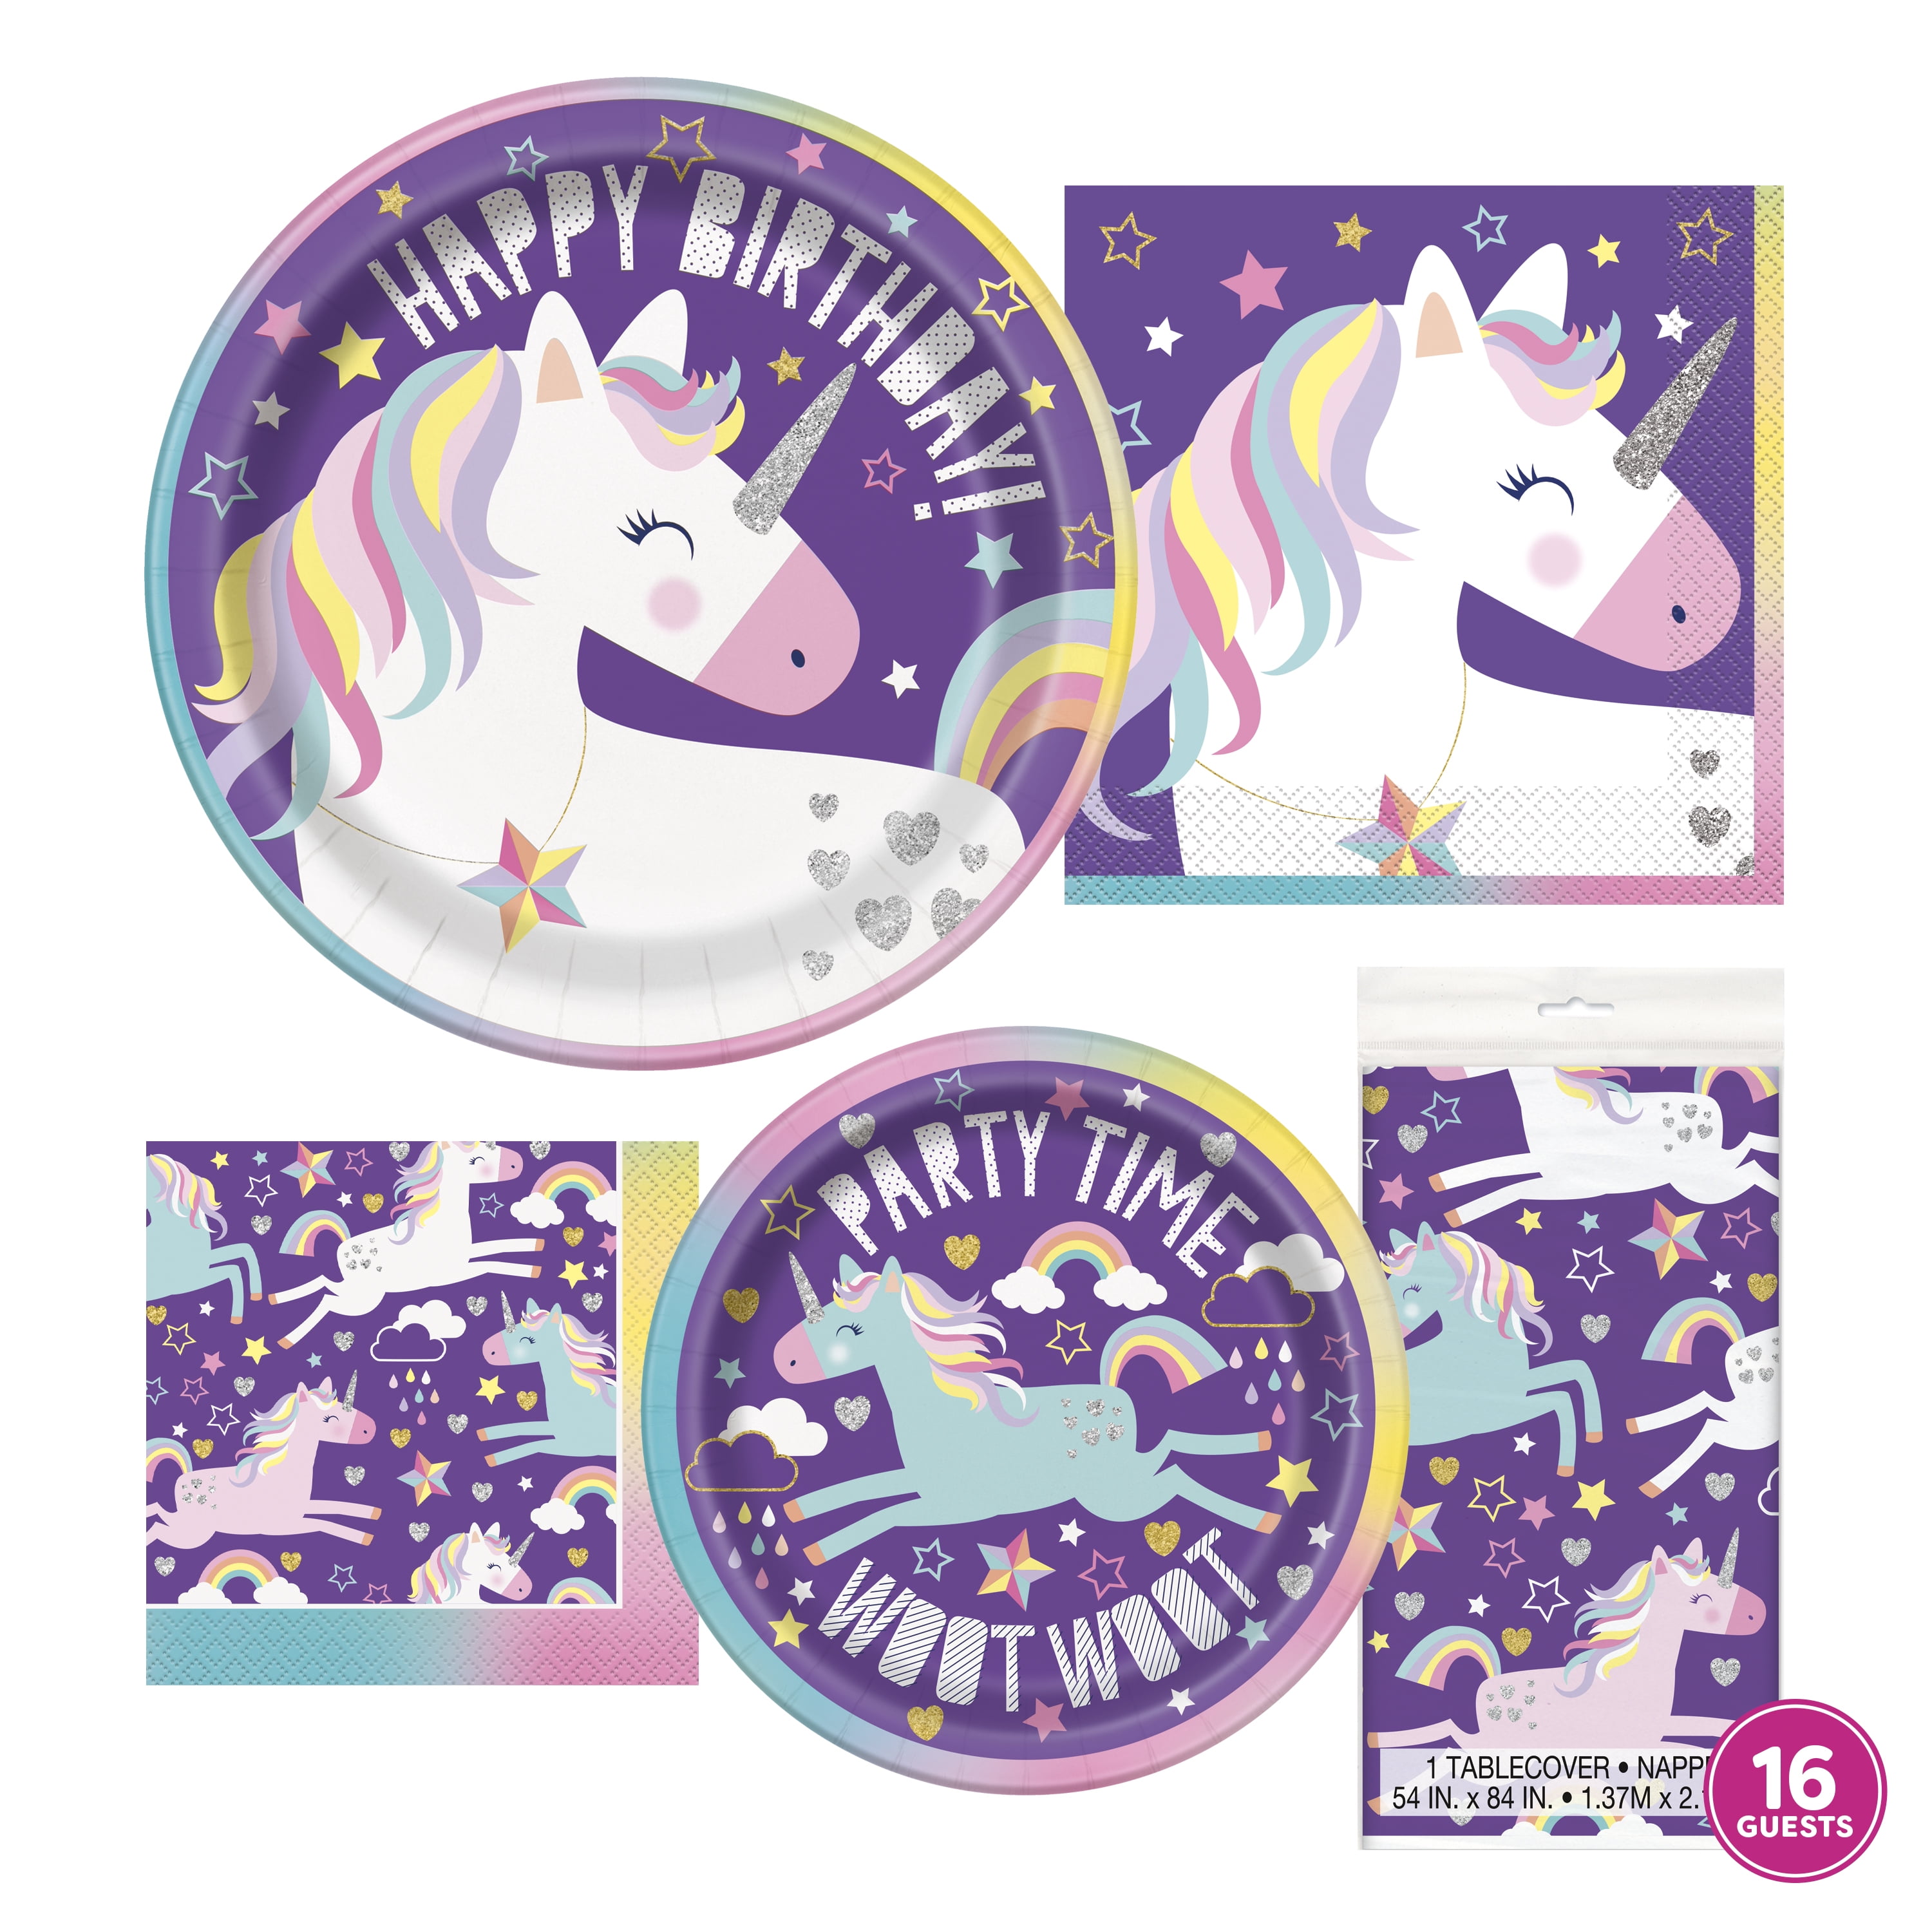 FZR Legend Sparkle Unicorn Themed Party Supplies Disposable Unicorn Birthday Party Decorations for Girls and Baby Shower 6.7 x 6.7 Inches Folded Unicorn Beverage Lunch Napkins 50 ct Gold Pink